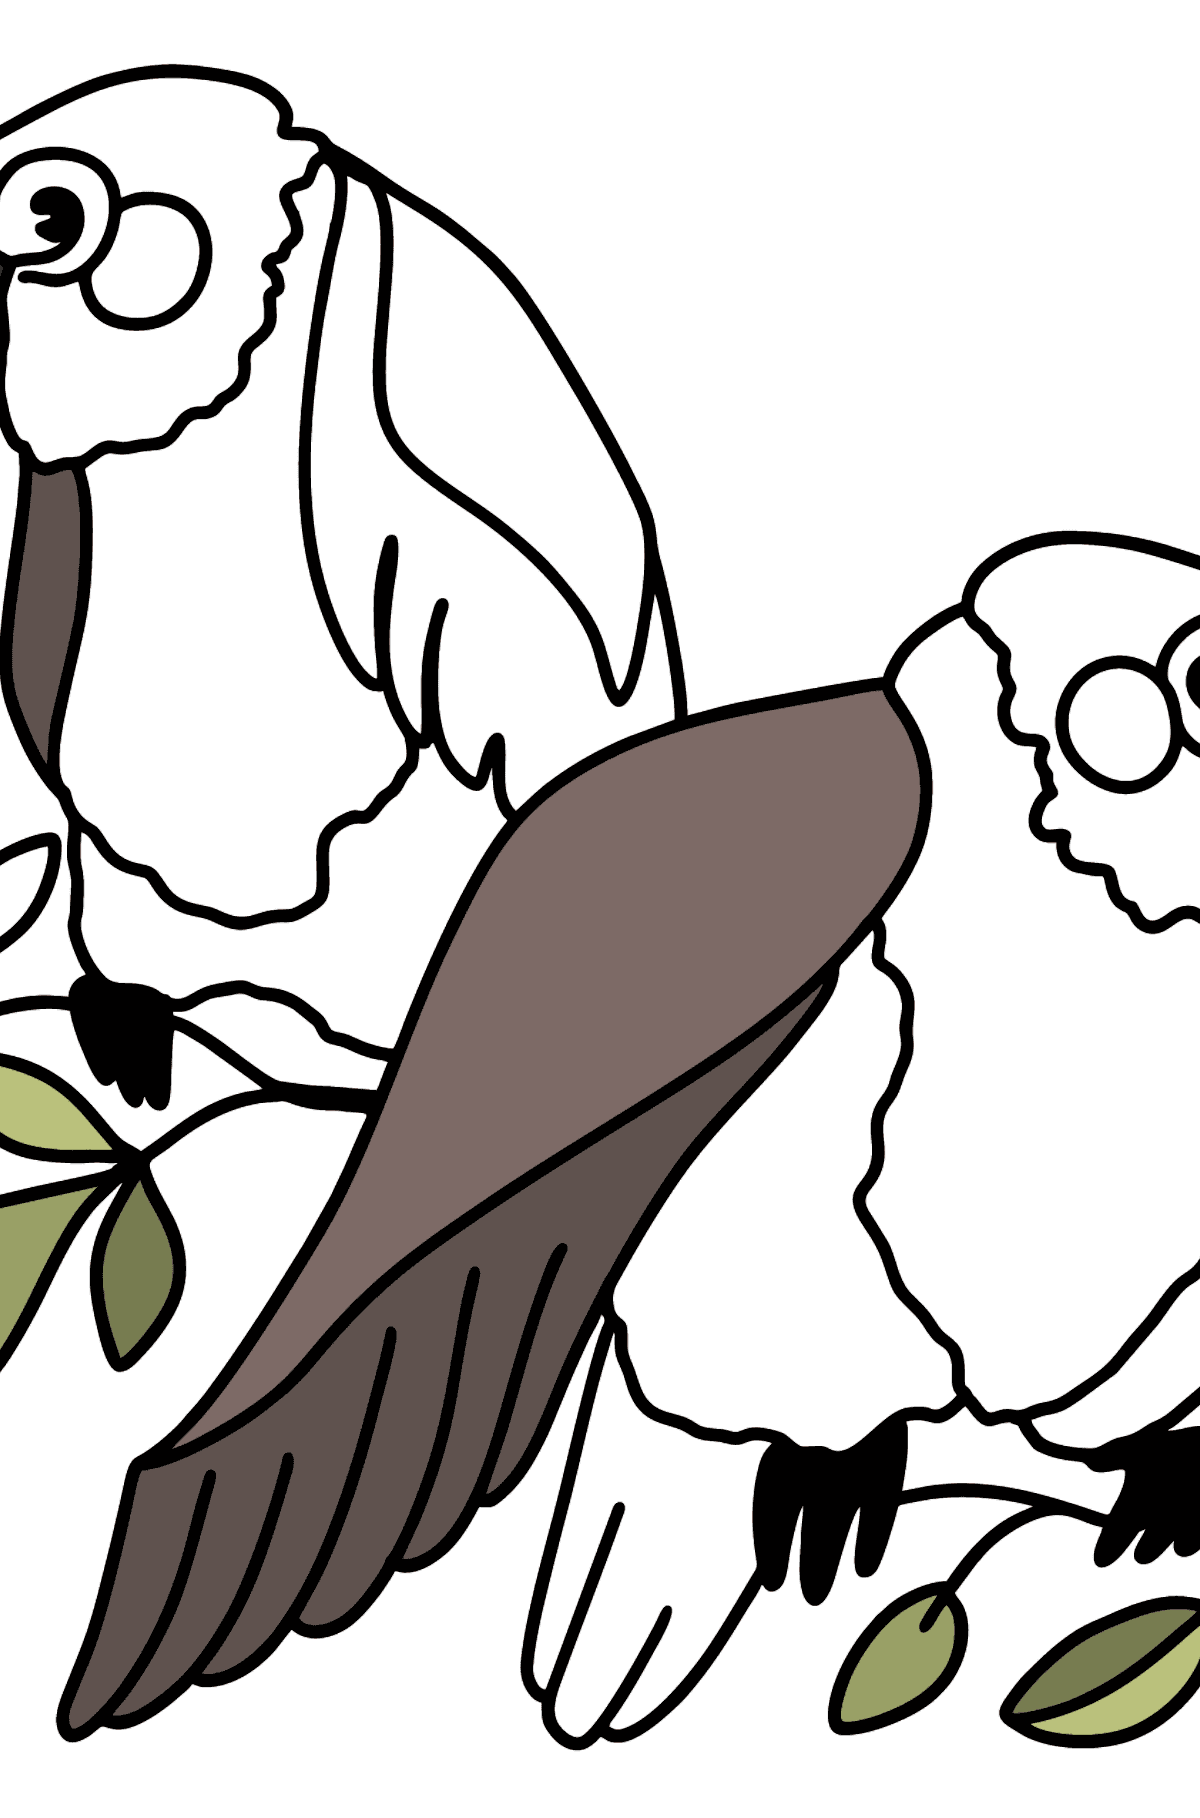 Two Parrots coloring page - Coloring Pages for Kids